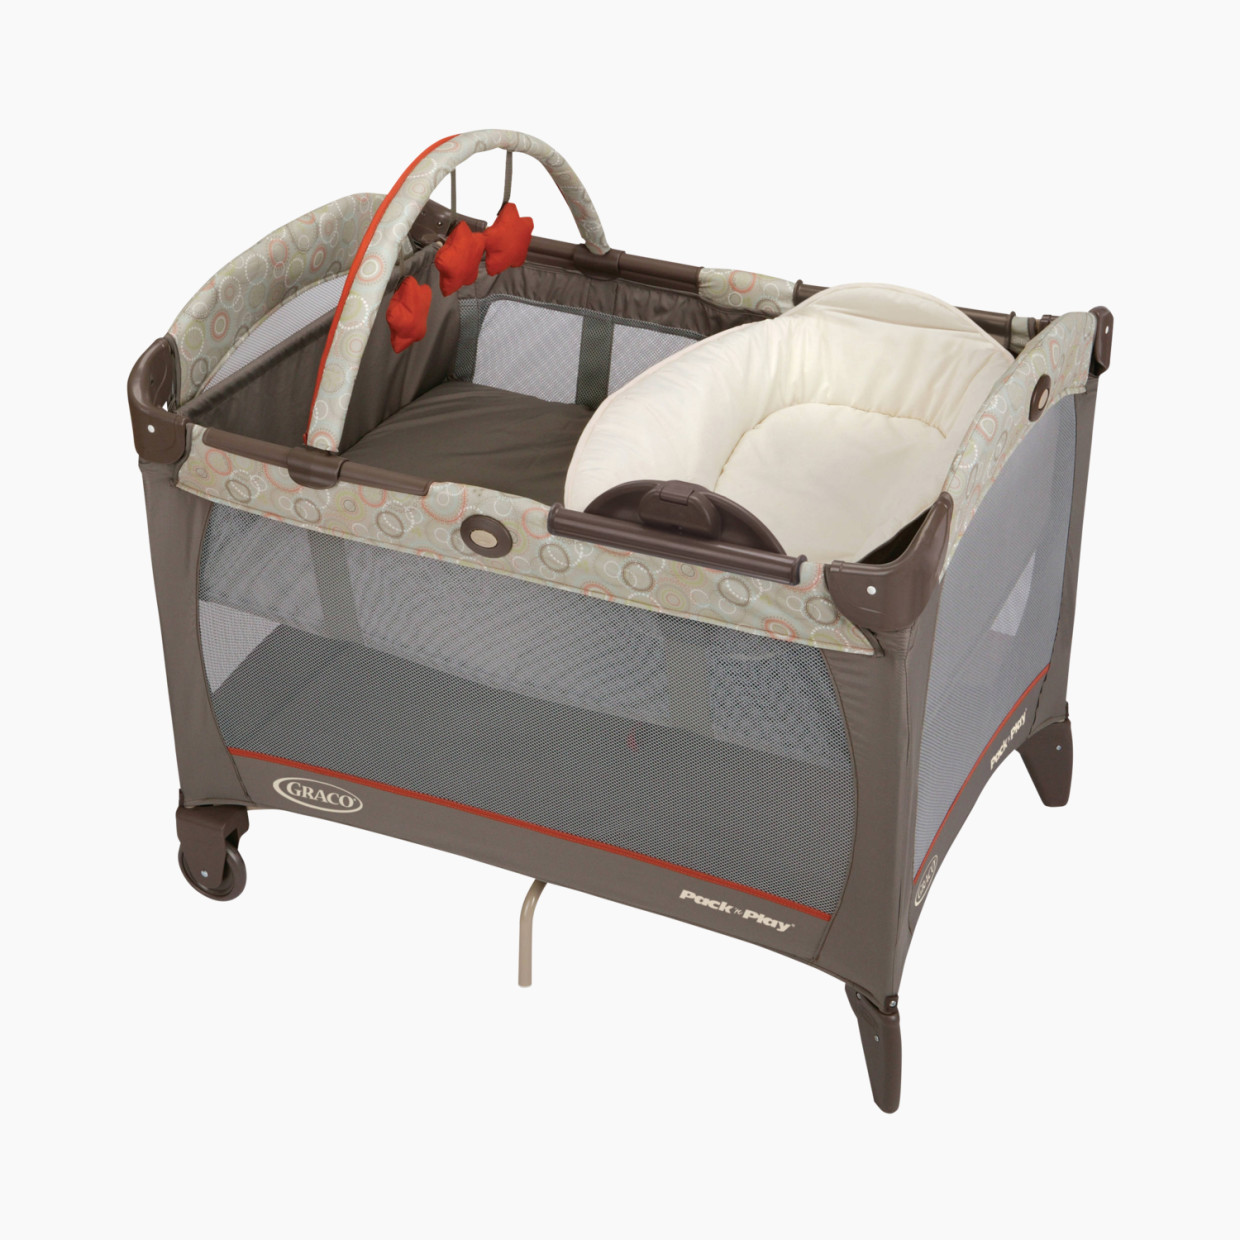 Graco Pack n' Play Reversible Napper and Changer Playard - Forecaster.